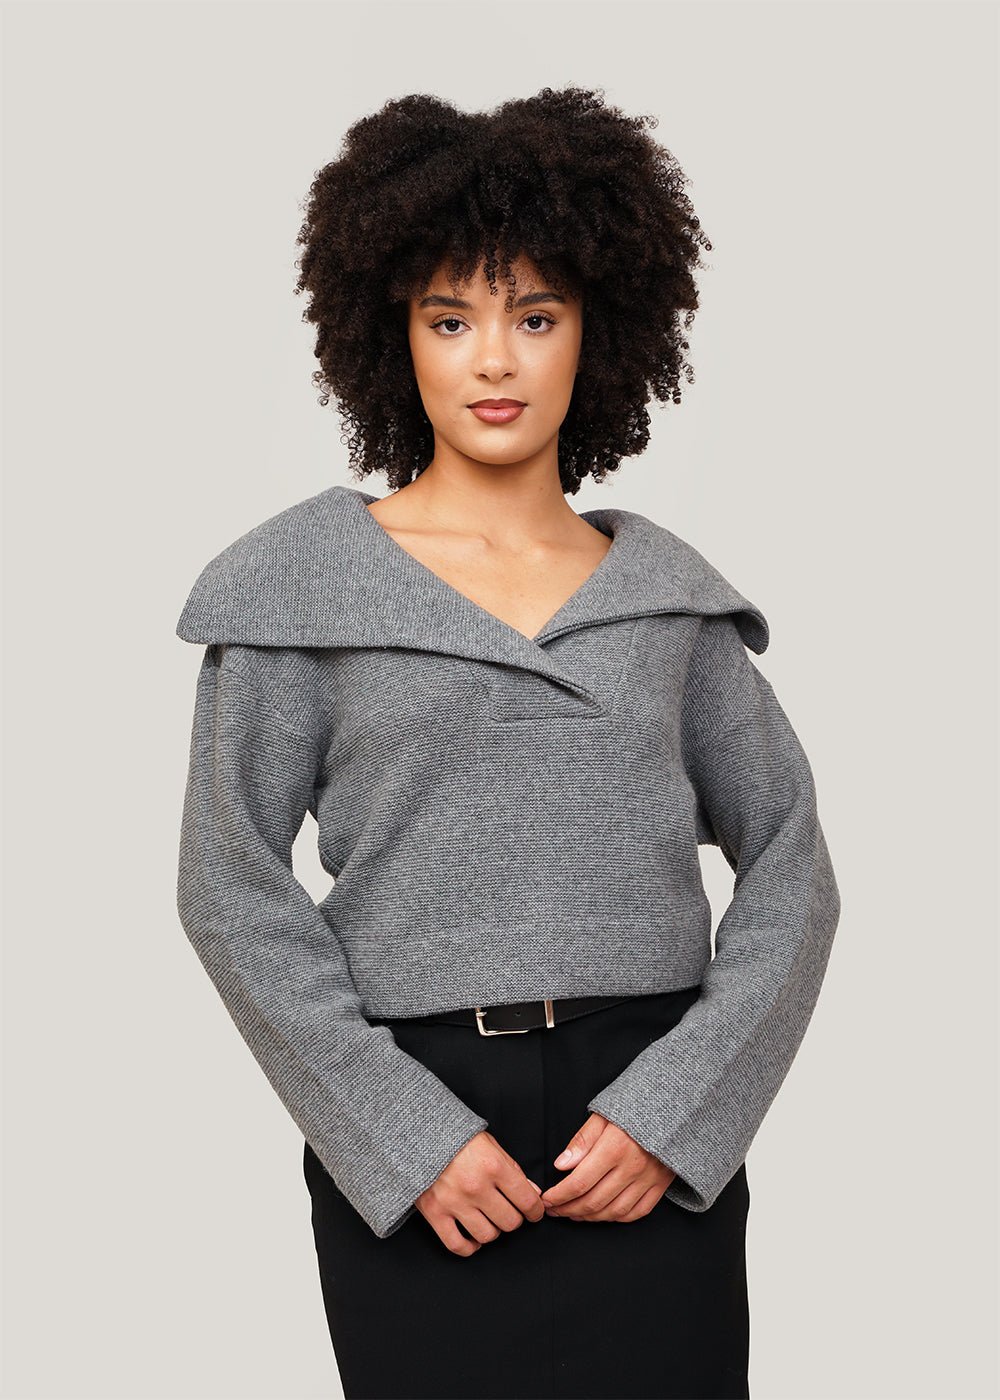 Beaufille Grey Botero Sweater - New Classics Studios Sustainable Ethical Fashion Canada